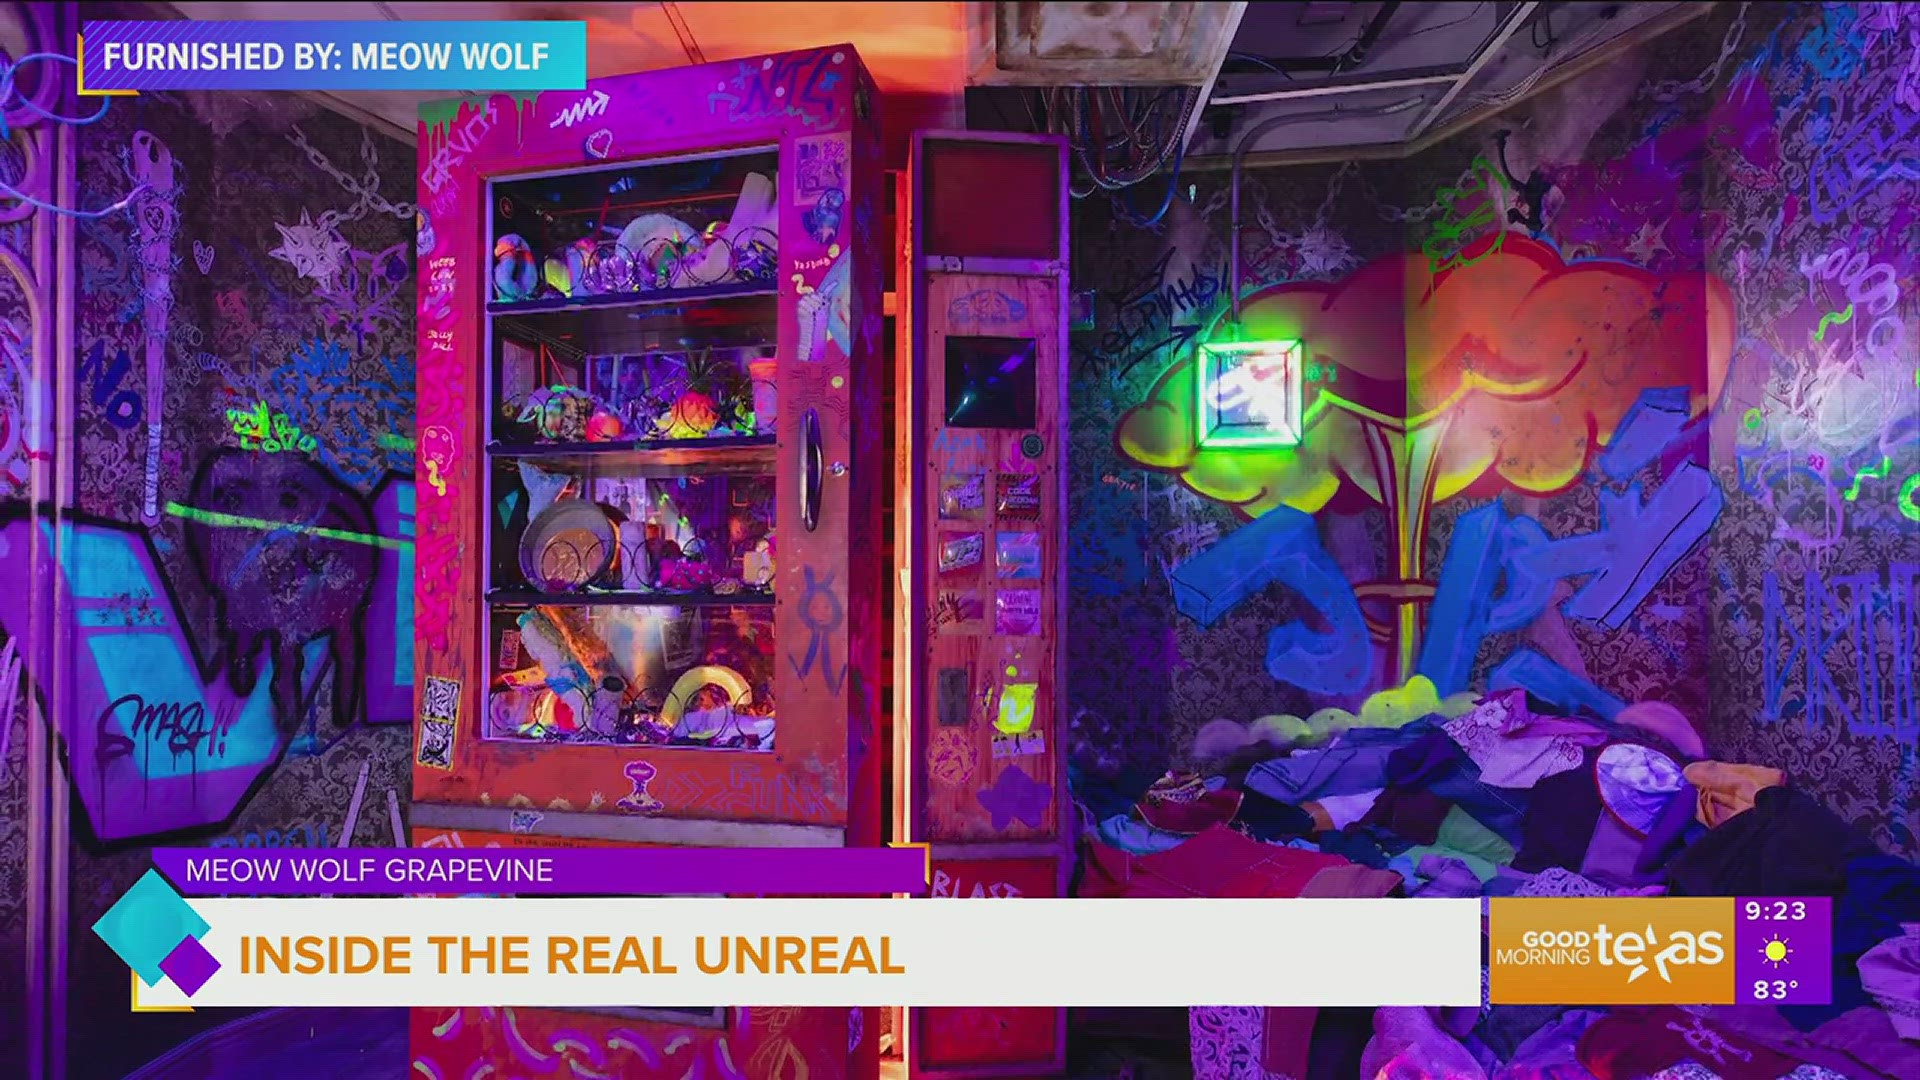 Paige tours Meow Wolf The Real Unreal in Grapevine opening Friday, July 14